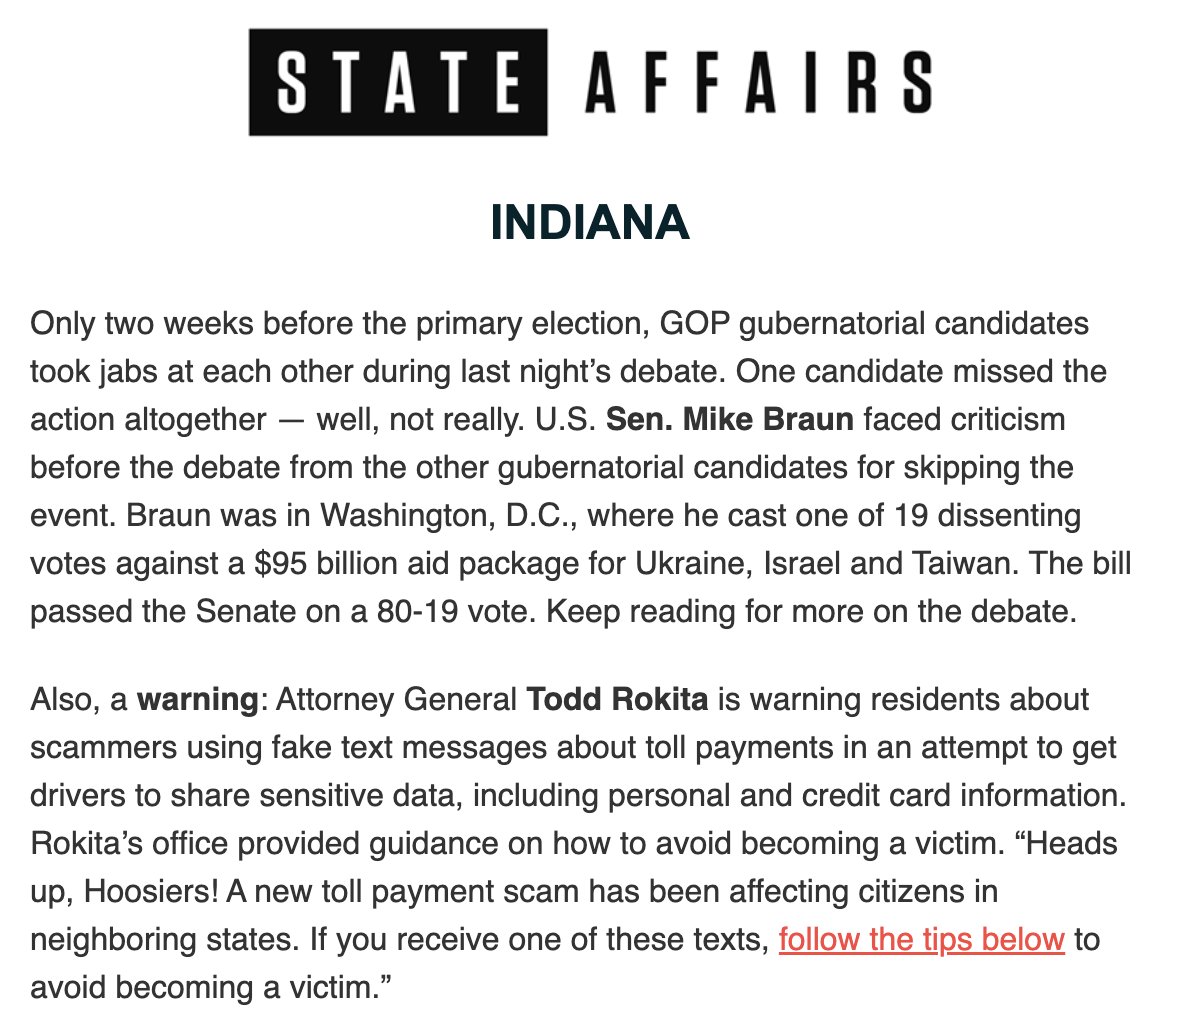 Our weekly #Indiana newsletter is in your inbox 📥

In this week’s edition: 
✍️ Key moments from the final GOP governor debate
✍️ Playmaker profile: Mike Braun bills himself as an ‘outsider’